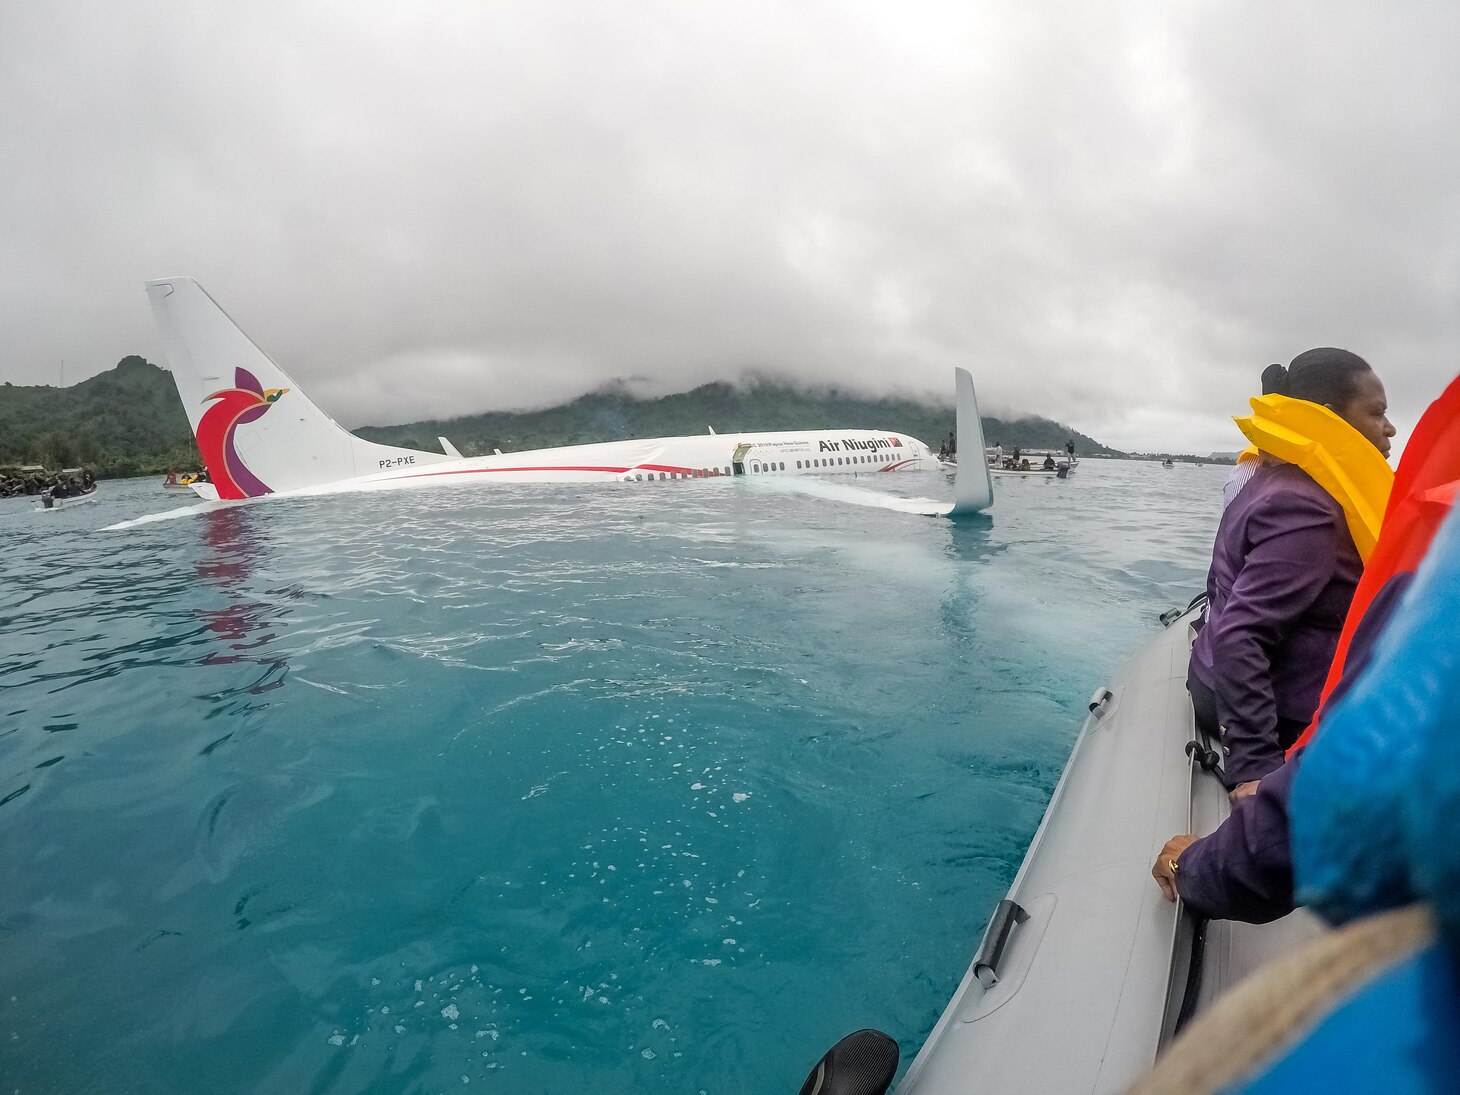 CHUUK, Federated States of Micronesia (Sept. 28, 2018) U.S. Navy Sailors from Underwater Construction Team (UCT) 2 assist local authorities in shuttling the passengers and crew of Air Niugini flight PX56 to shore following the plane crashing into the sea on its approach to Chuuk International Airport in the Federated States of Micronesia.